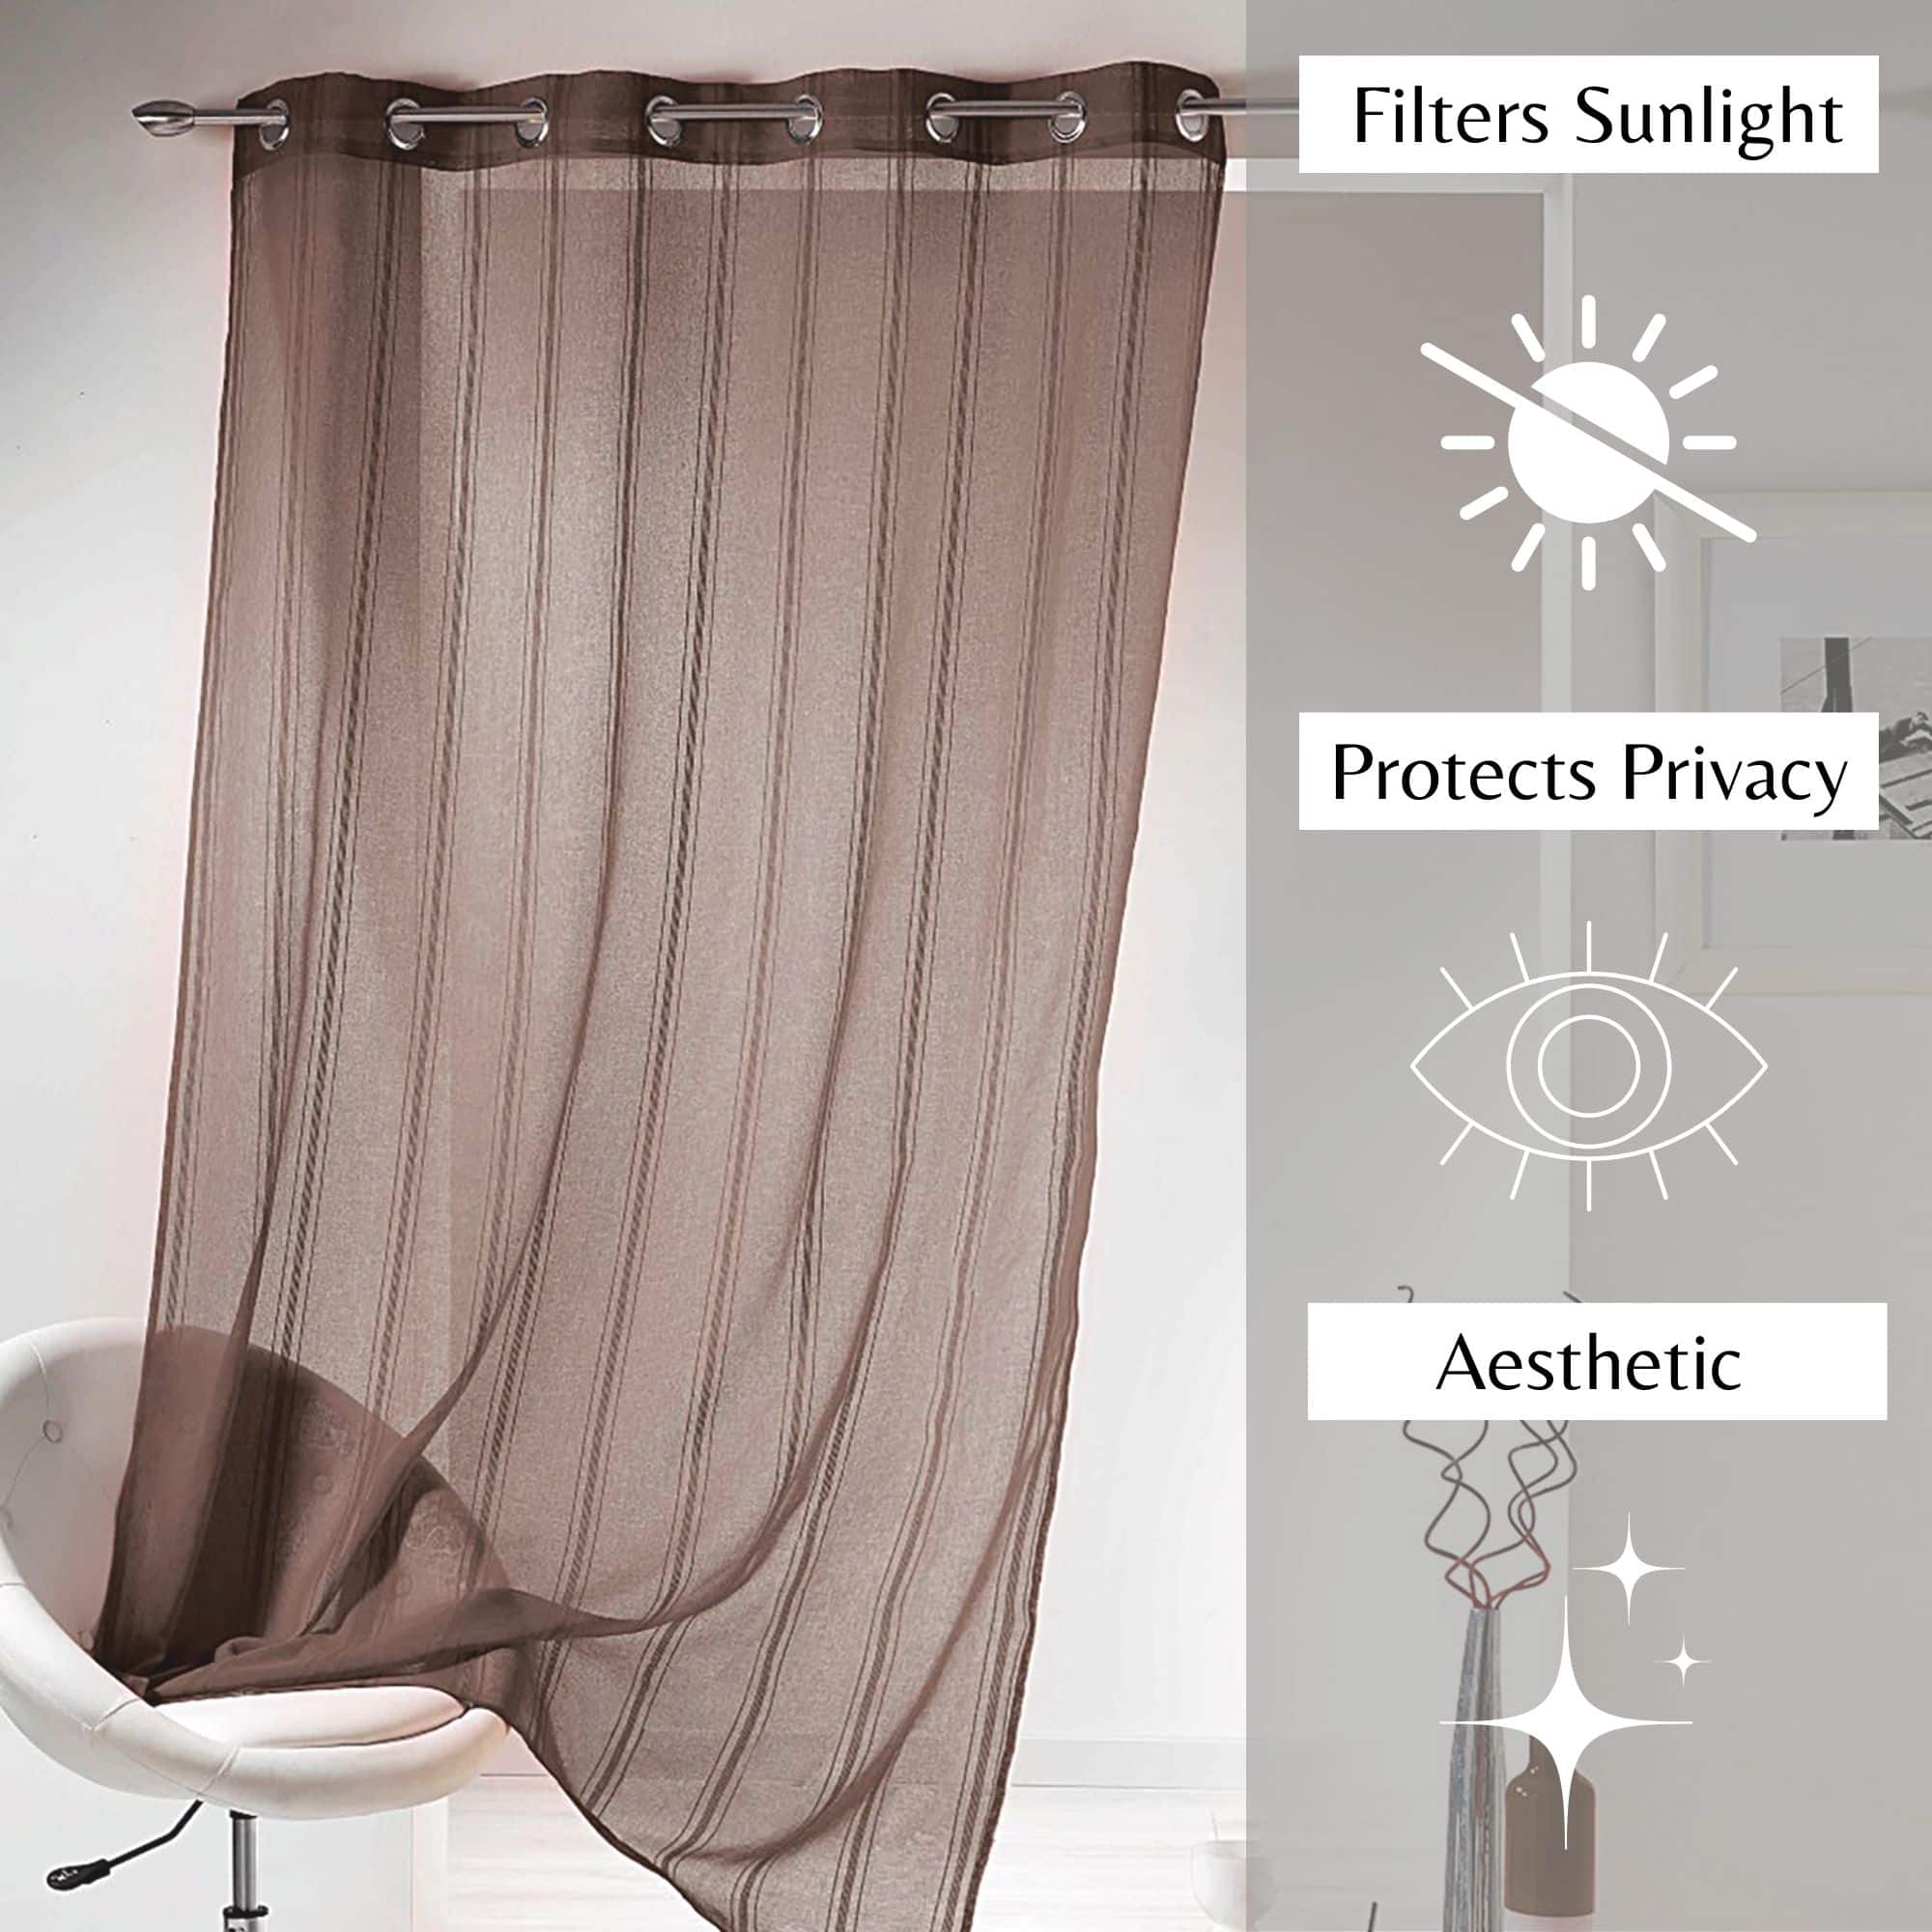 filters sunlight protects privacy aesthetic sheer voile for home decor